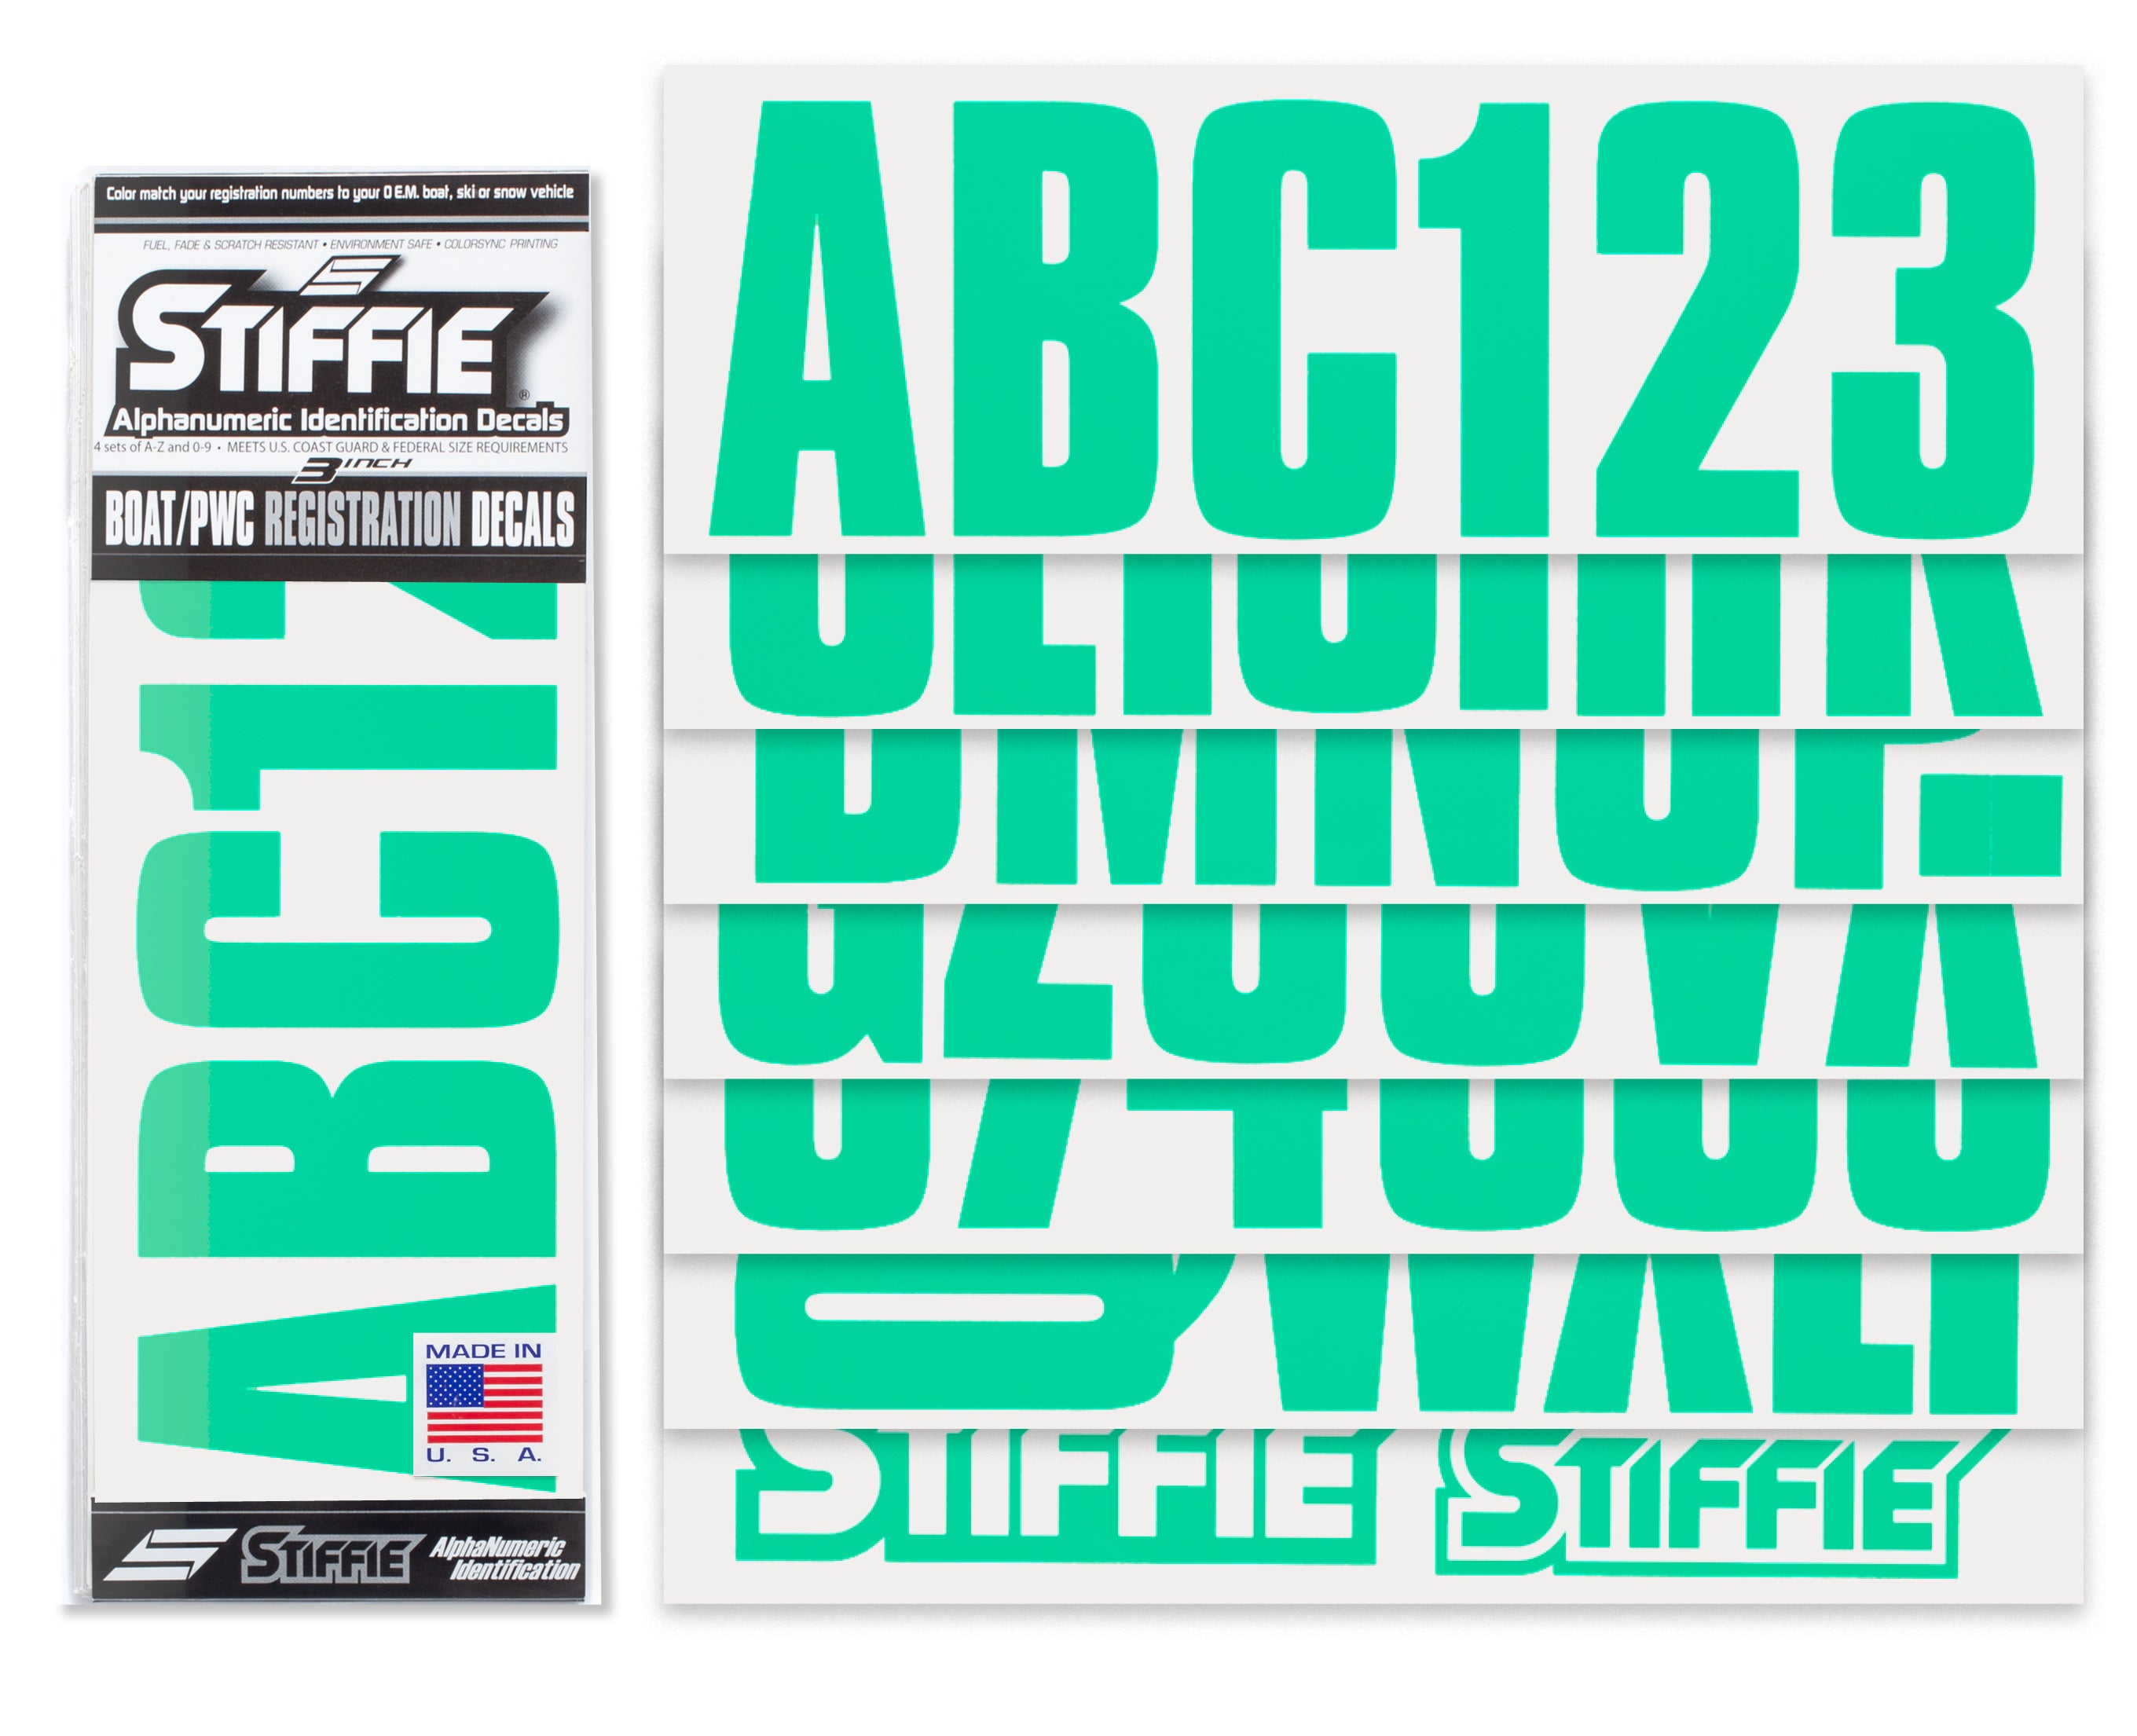 STIFFIE Uniline SeaFoam Green 3" ID Kit Alpha-Numeric Registration Identification Numbers Stickers Decals for Boats & Personal Watercraft